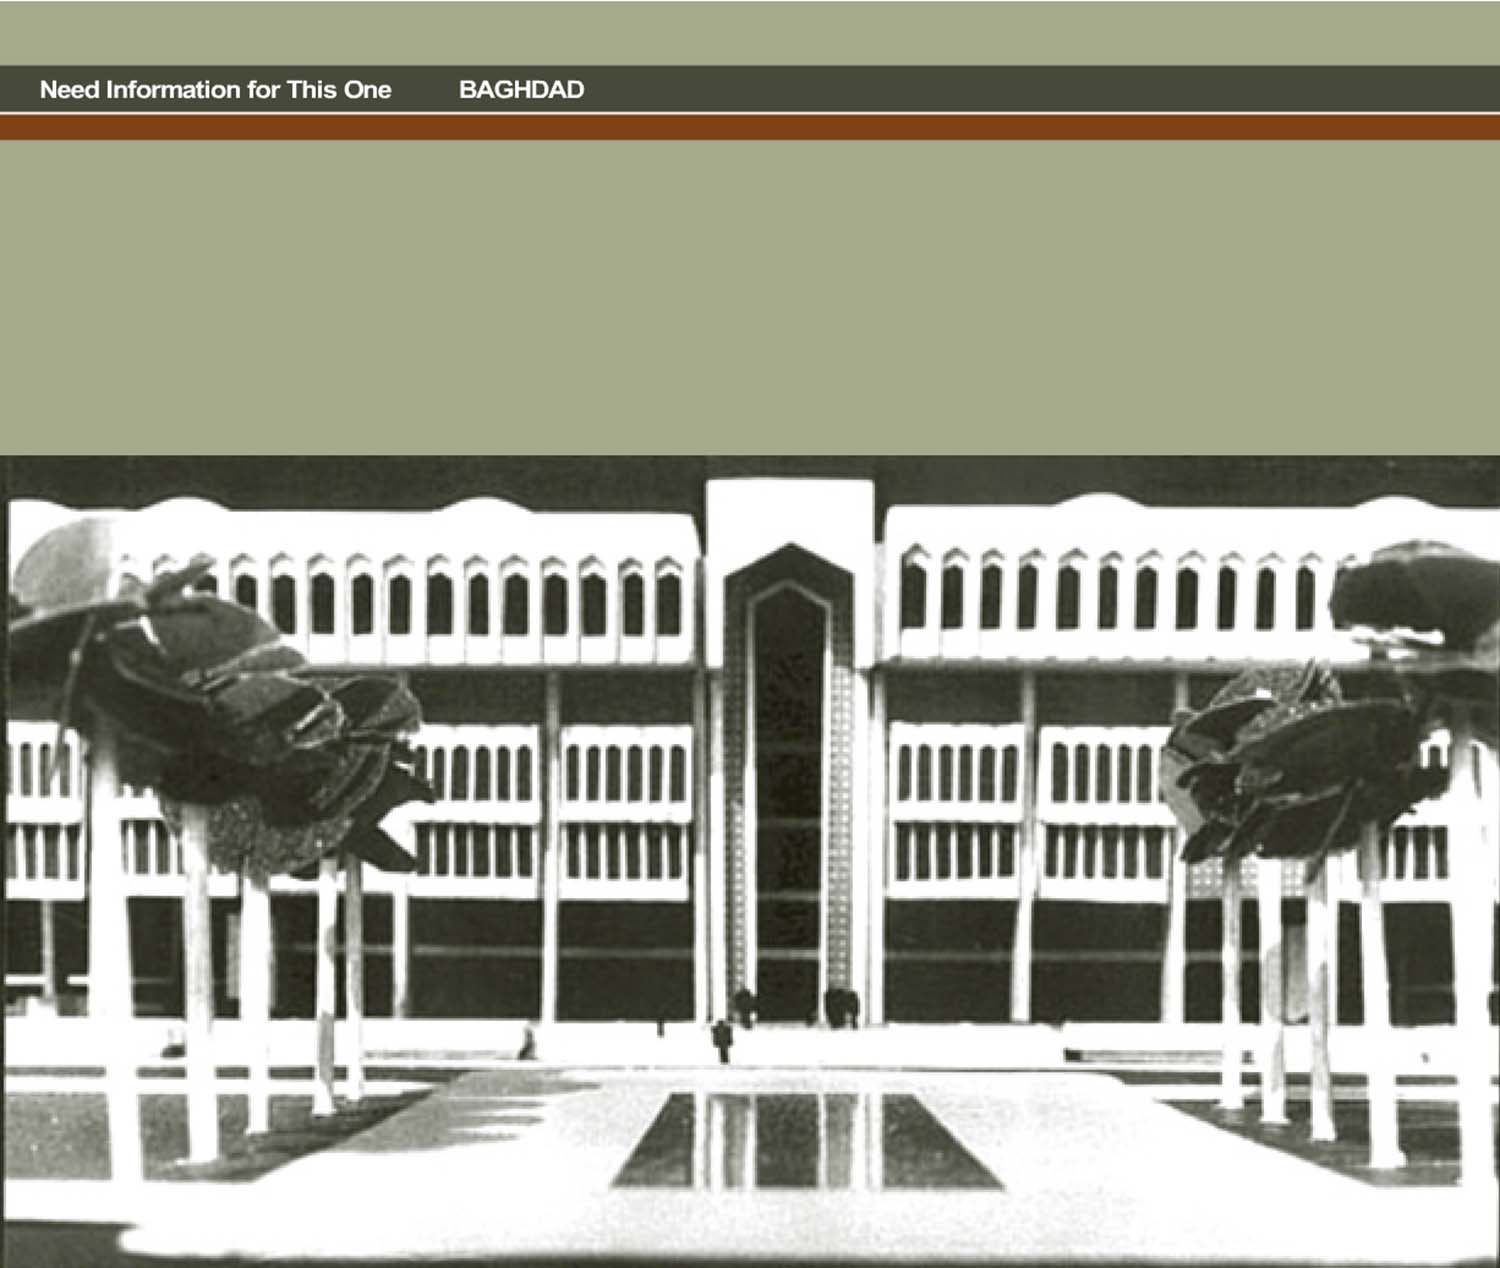 Digital image from the online project portfolio of Hisham Munir and Associates, showing a detail of the façade and main entrance from the project's model.